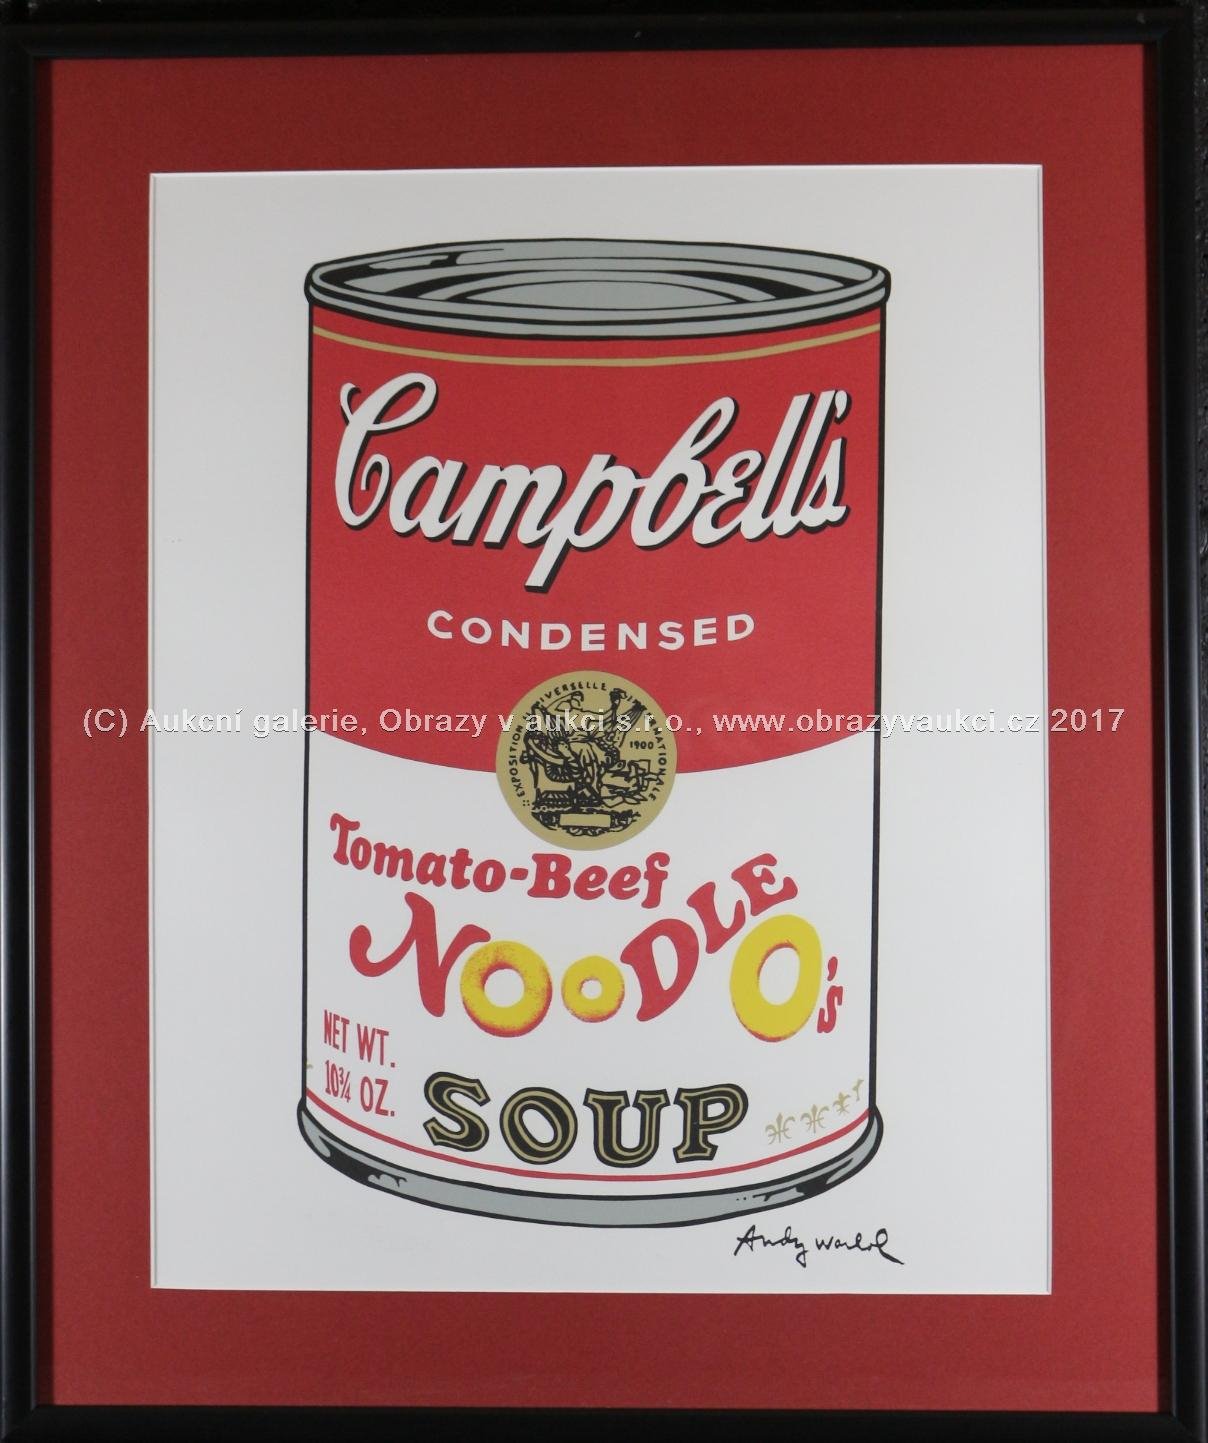 Andy Warhol - Campbell´s soup noodleo´s